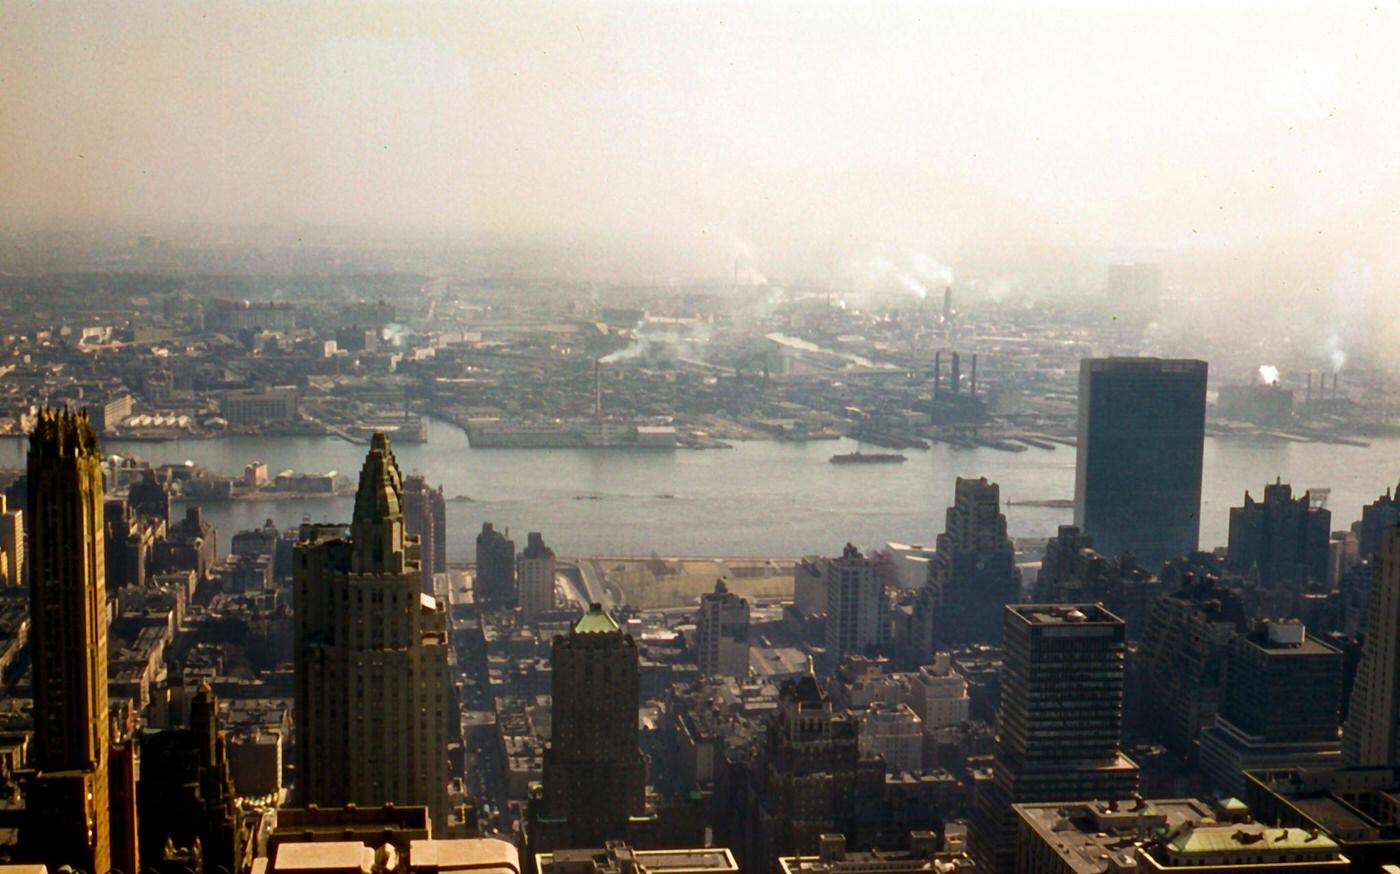 Panoramic View Of Midtown East With General Electric Building And Waldorf Astoria Hotel, Manhattan, 1957